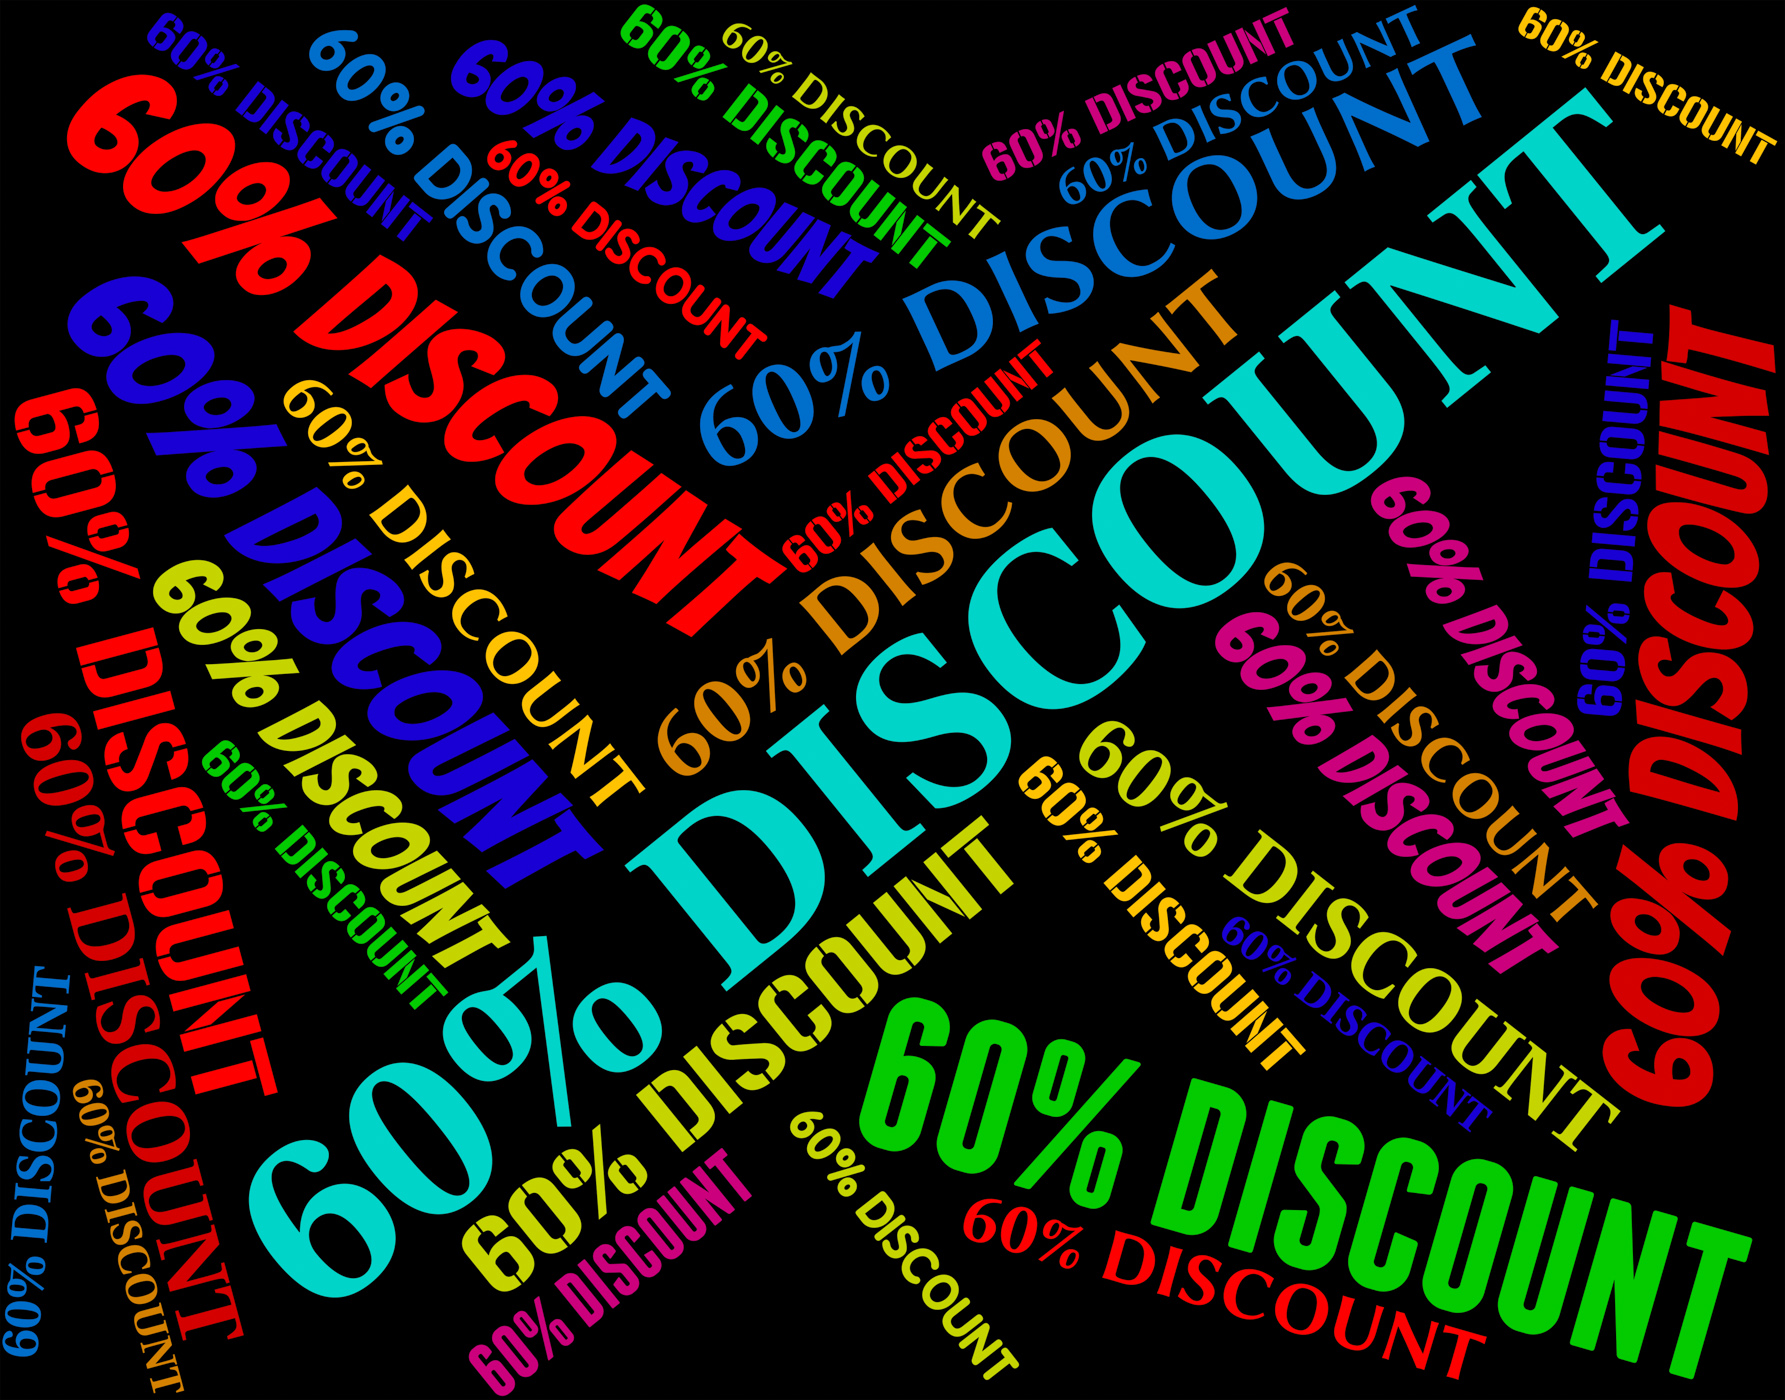 Big Sale Shows Closeout Discounts And Savings